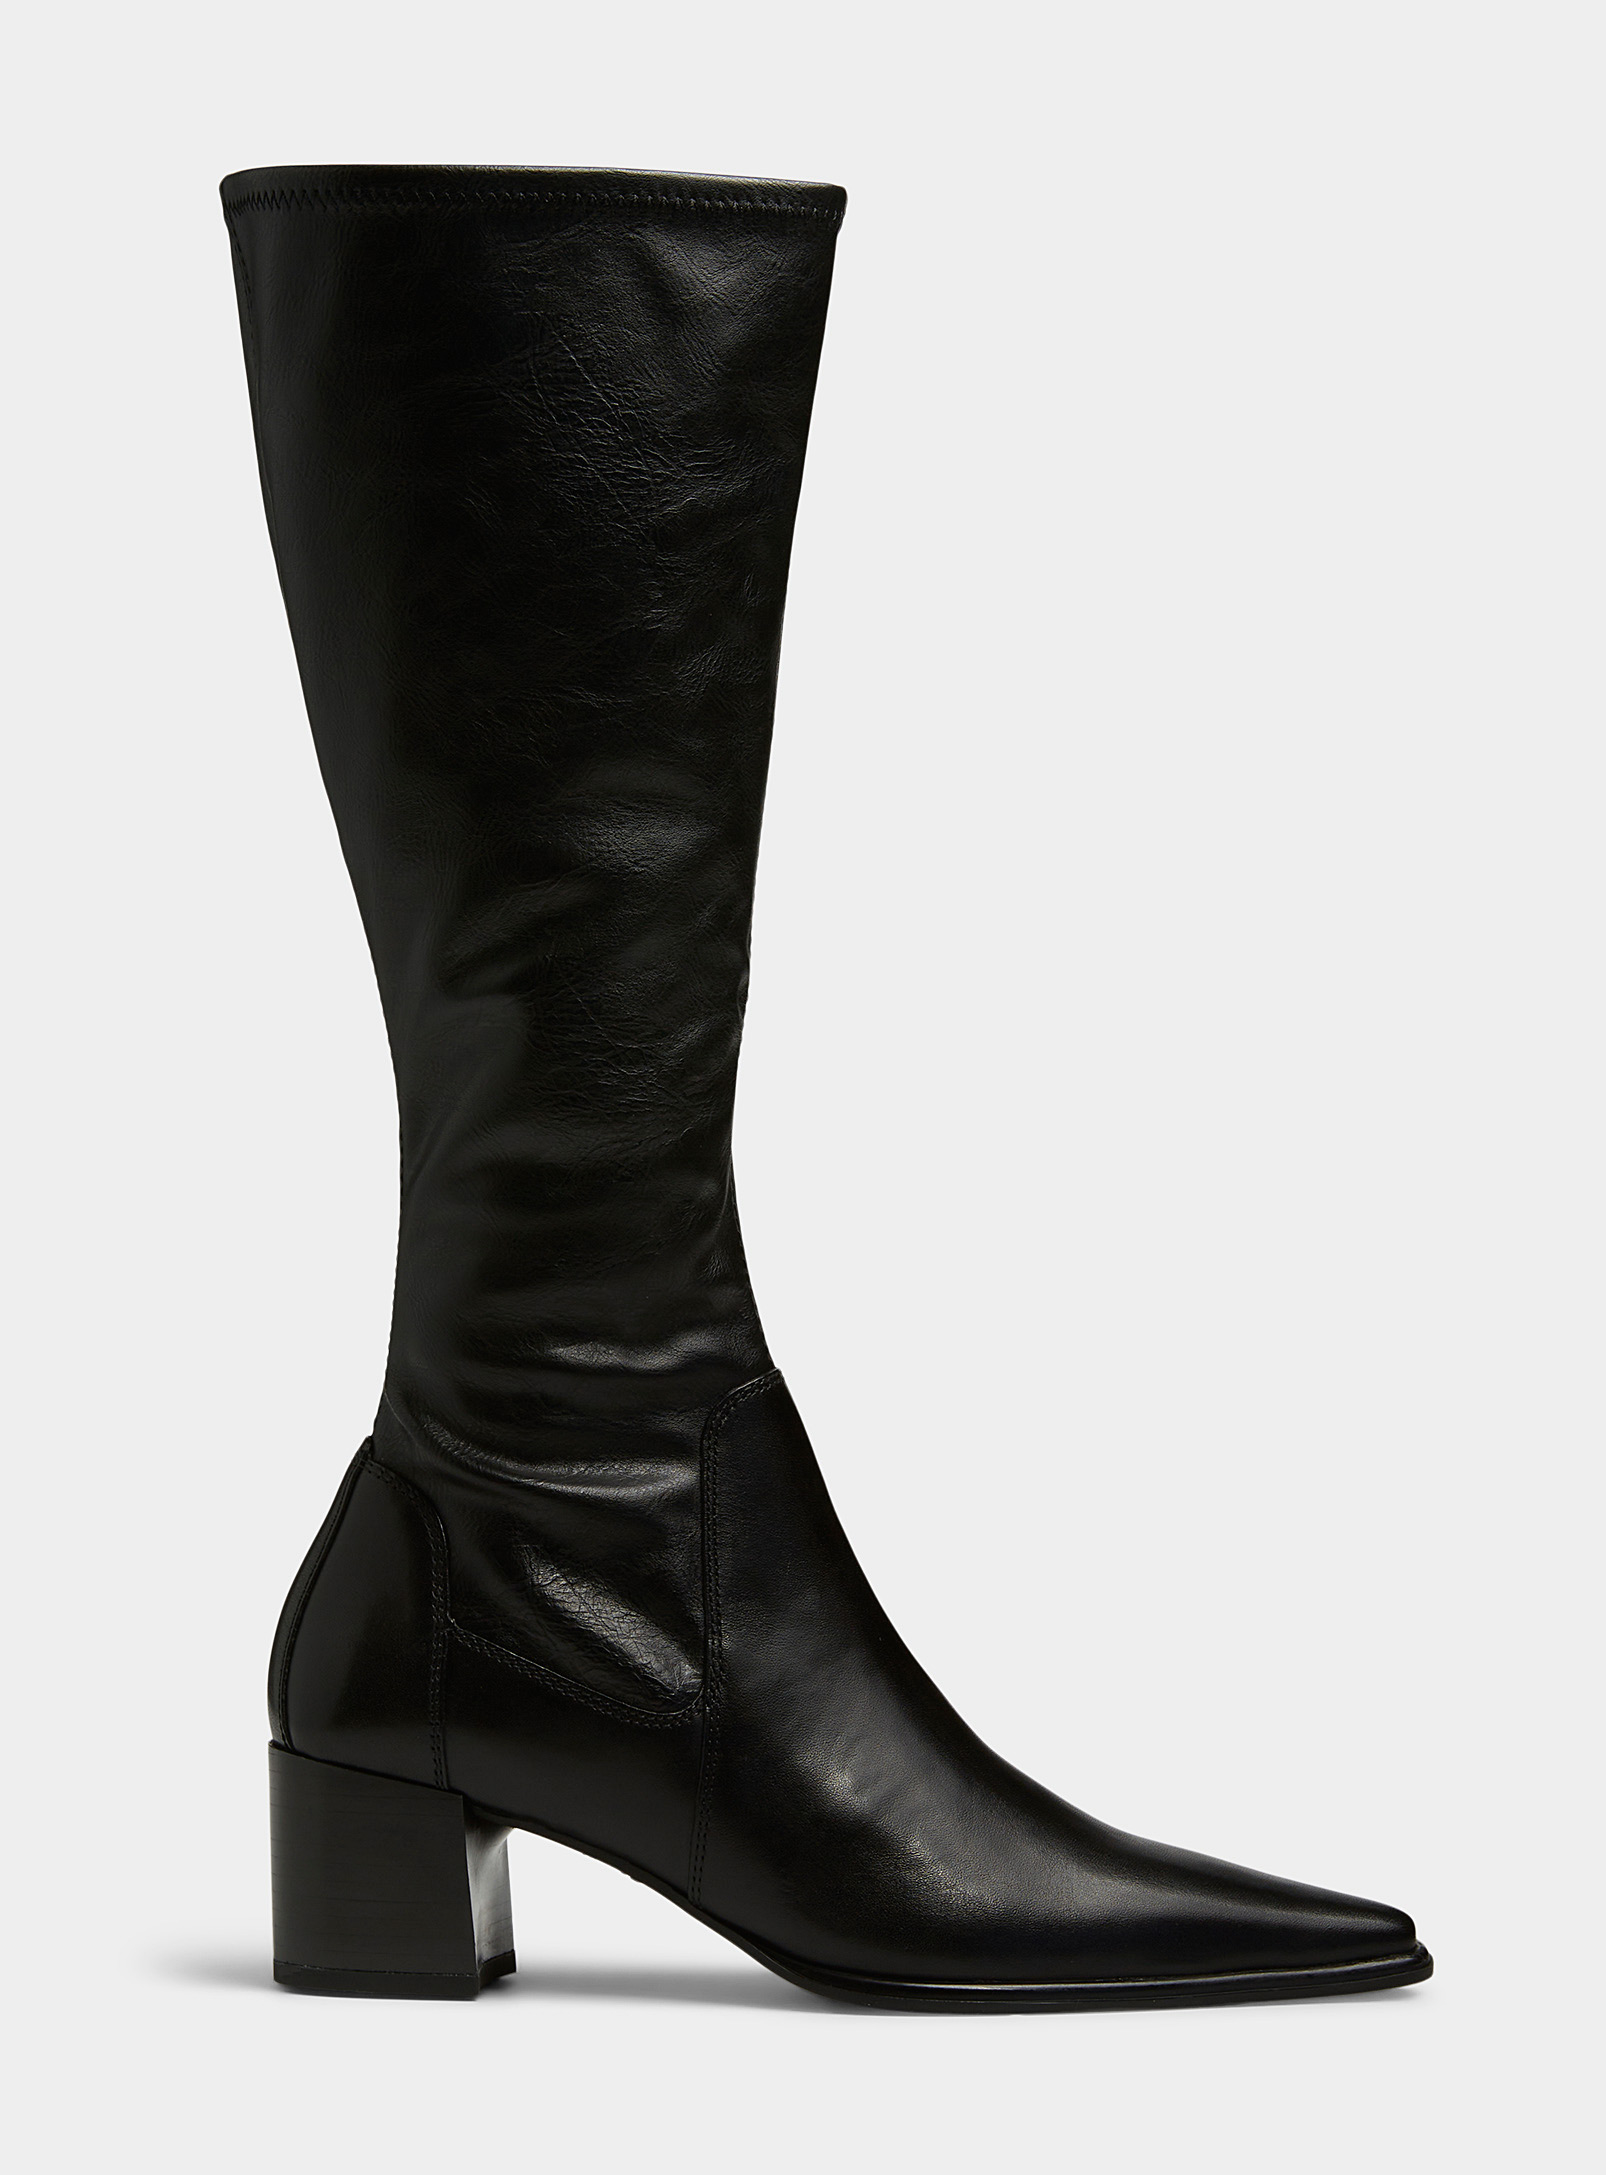 Vagabond Shoemakers - Women's Giselle soft leather knee-high boots Women